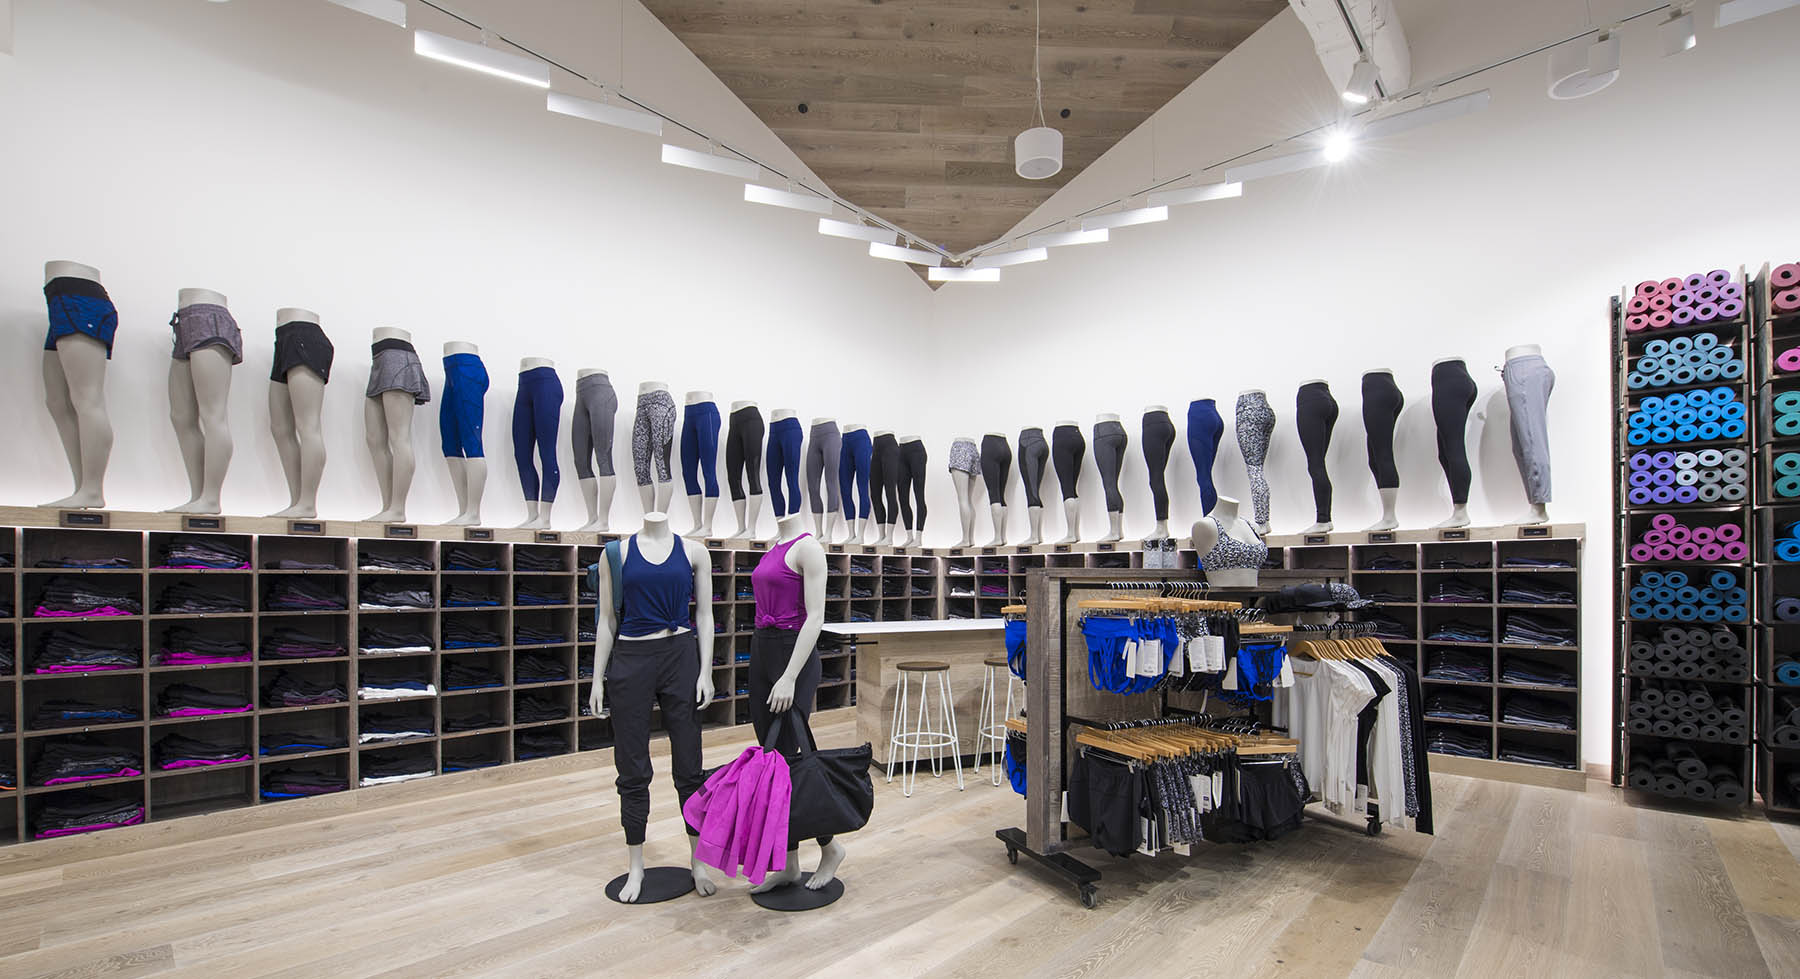 Lululemon Vs. Athleta: Which Is a Better Athleisure Store?